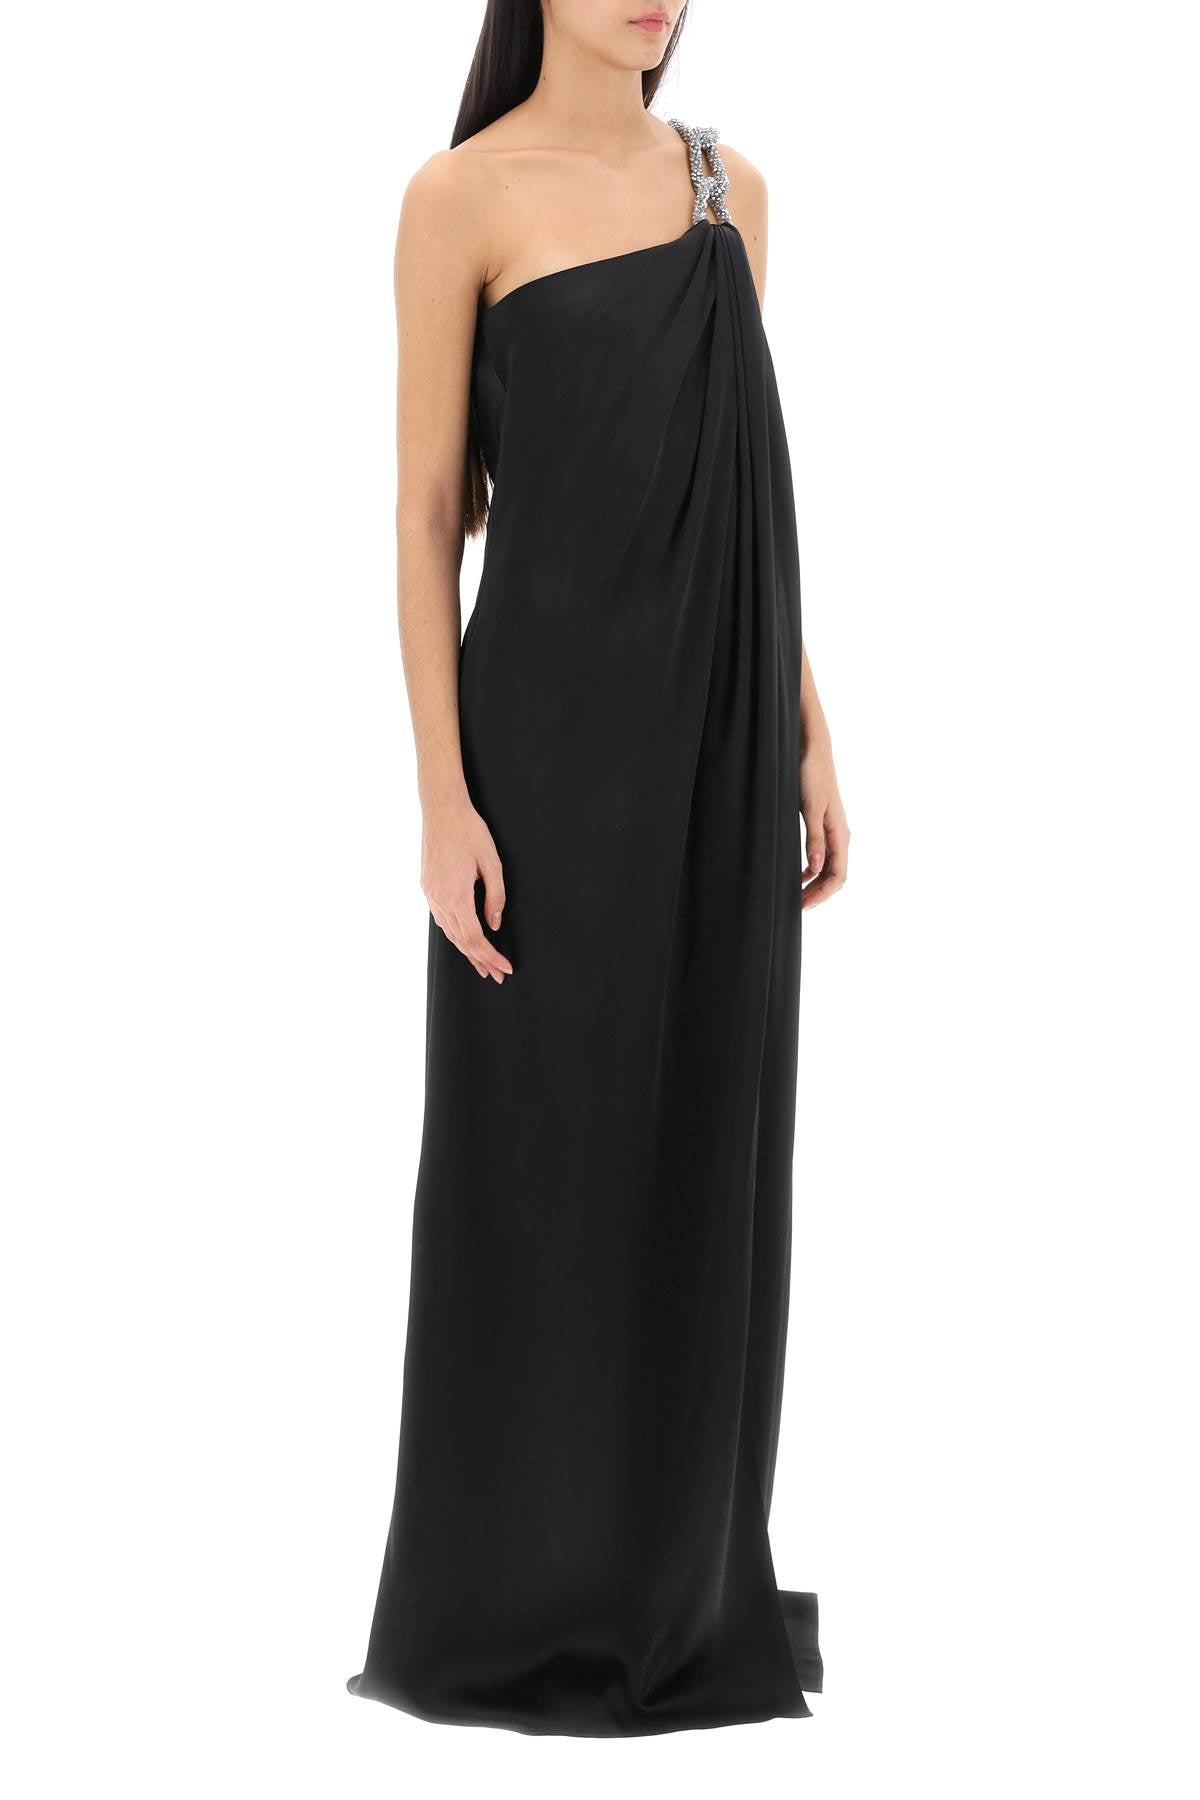 Stella mccartney one-shoulder dress with falabella chain-1